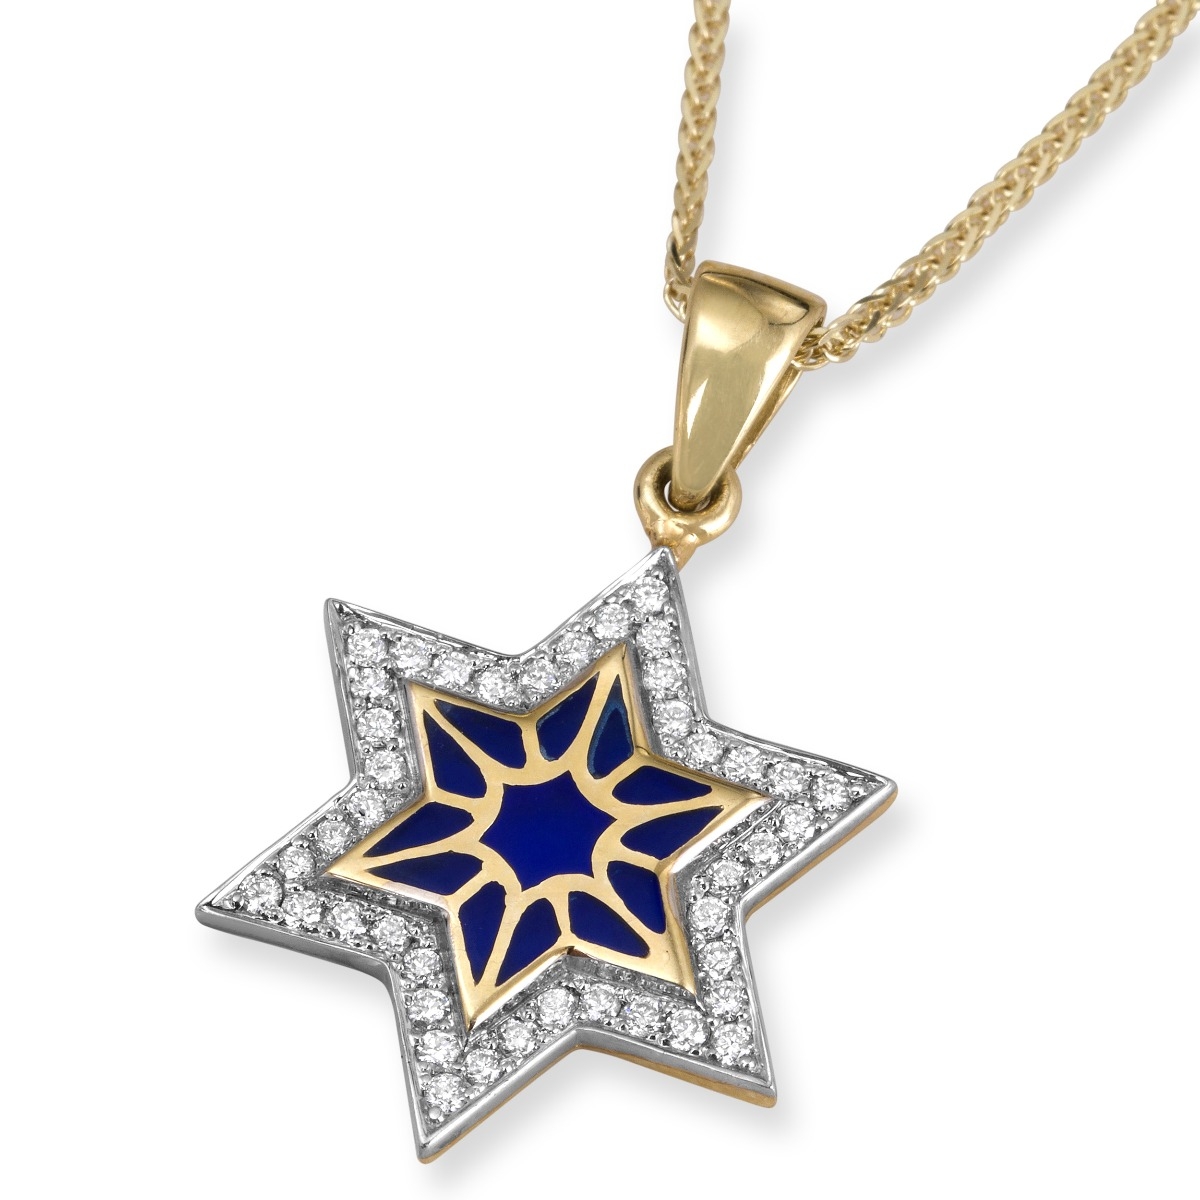  Chic 14K Yellow Gold and Blue Enamel Star of David Pendant With 42 Diamonds - 1